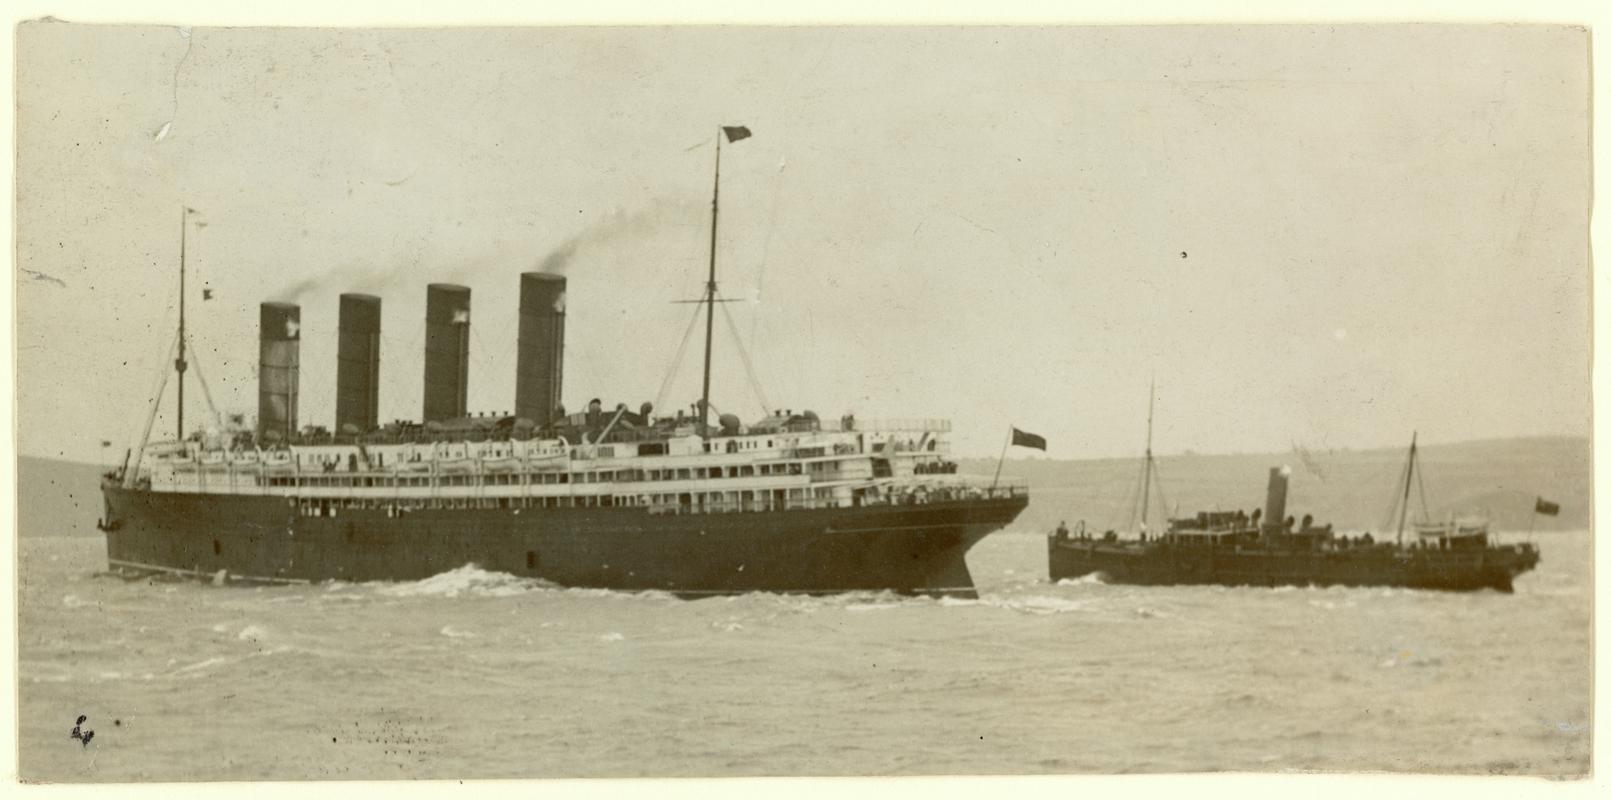 Mail tender S.S. PEMBROKE taking the post on the starboard side of the R.M.S. LUSITANIA at Fishguard.